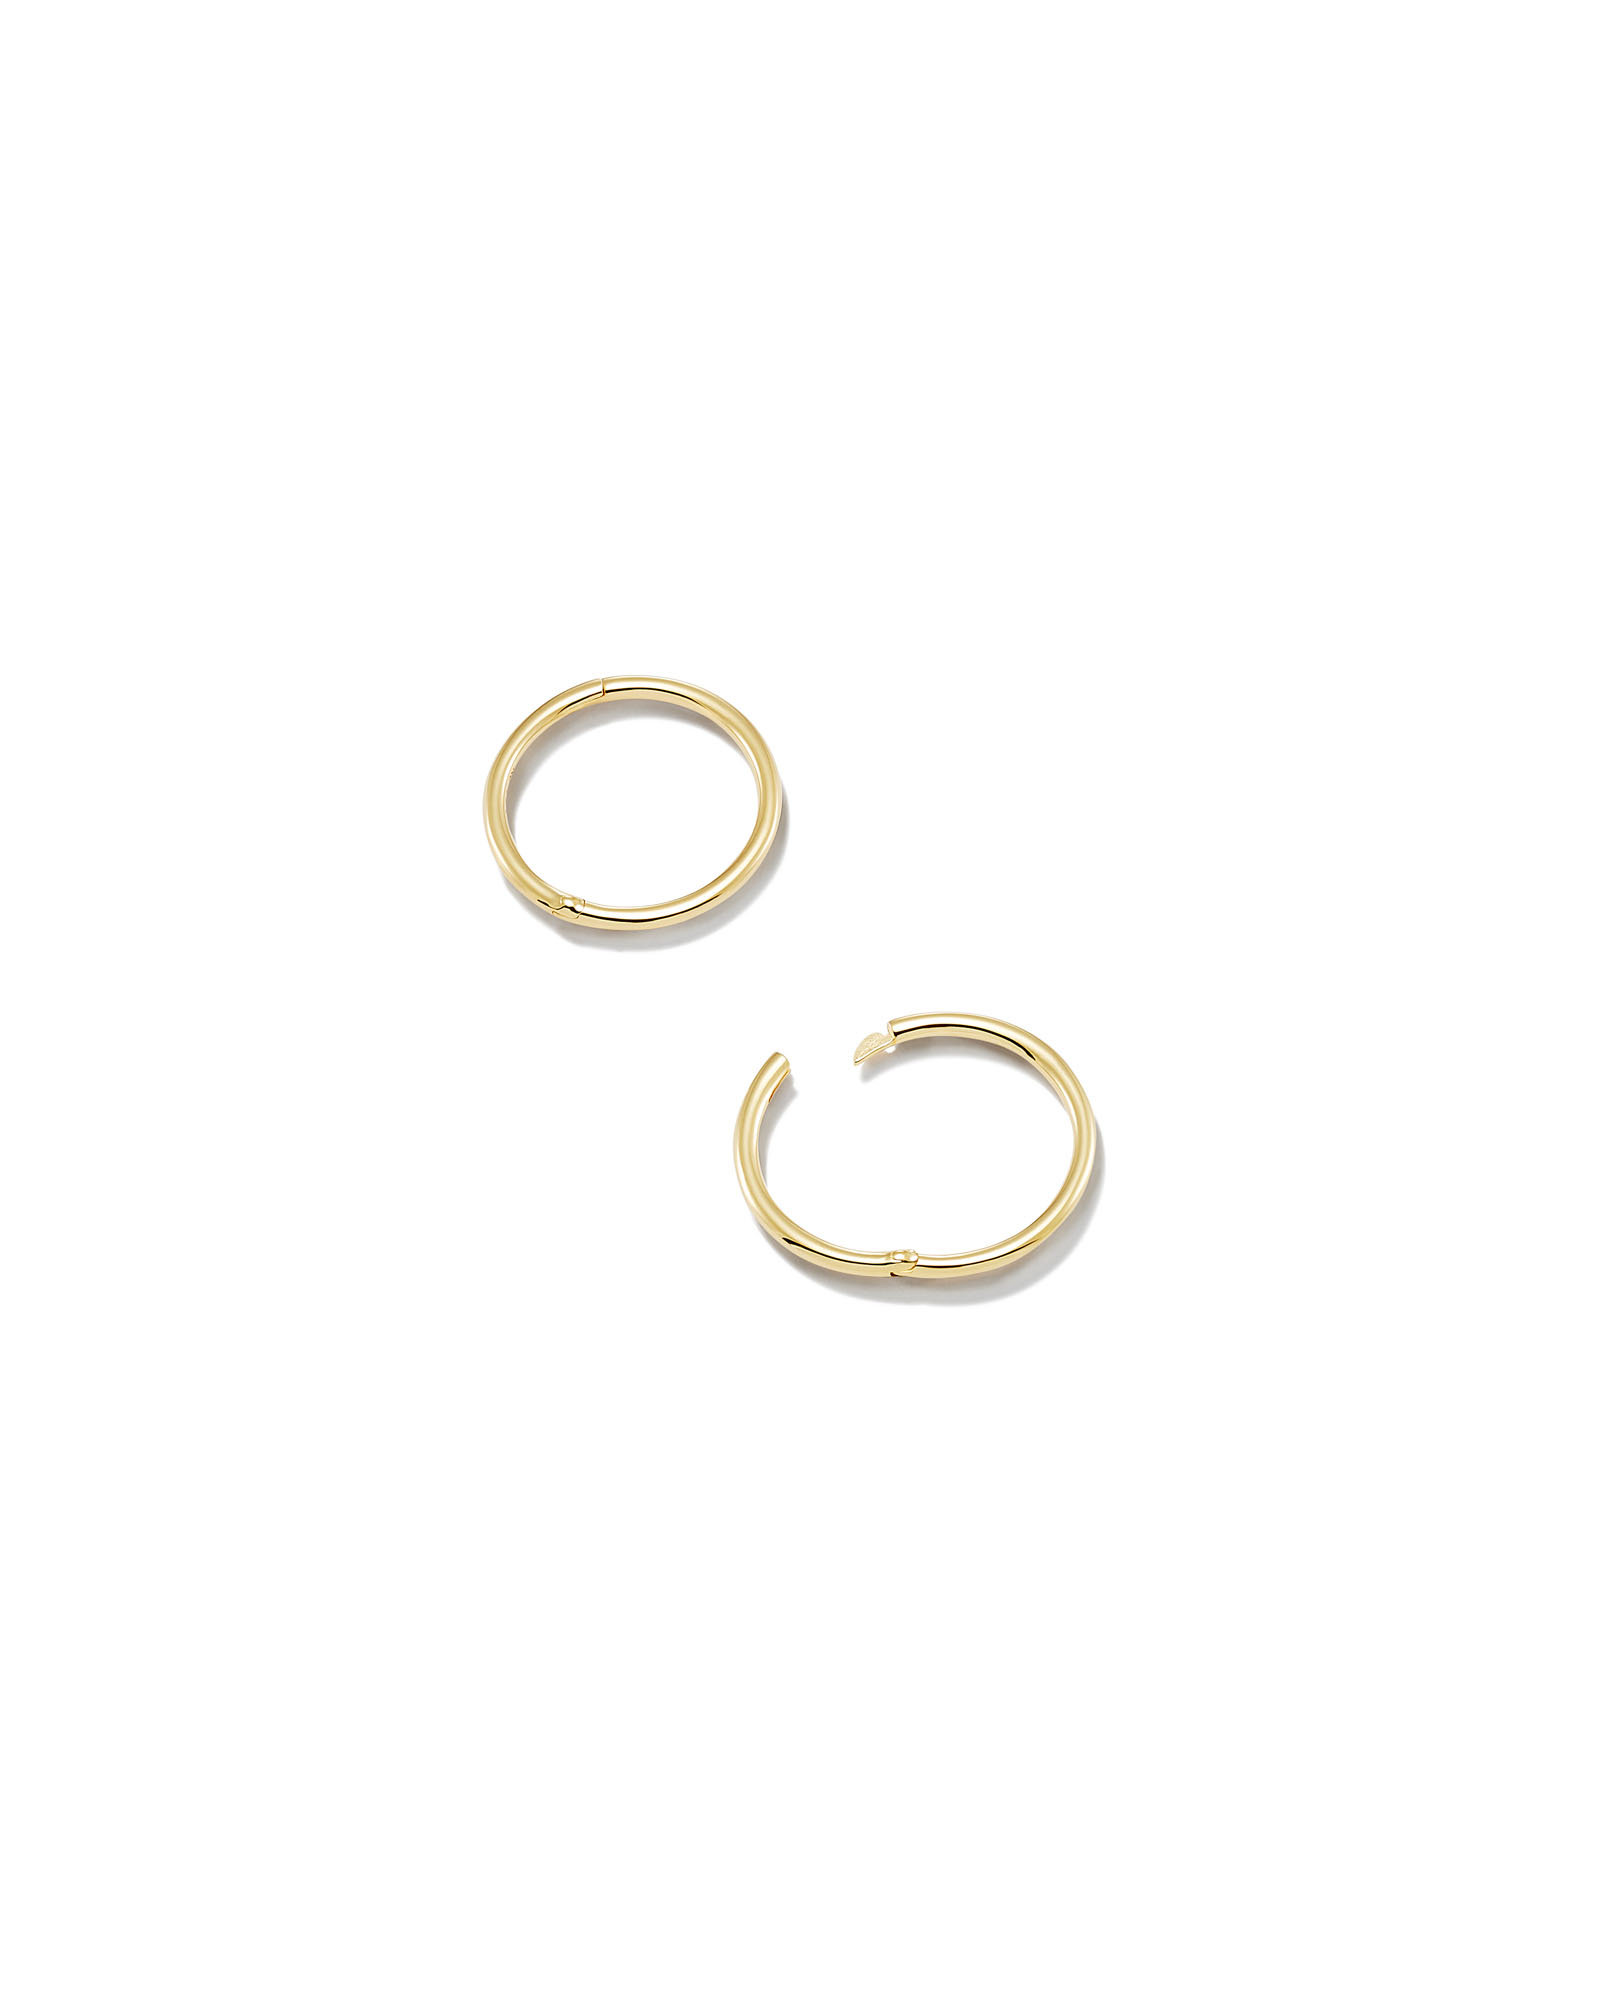 Everyday Hoop Earrings Small (13mm) Gold Filled